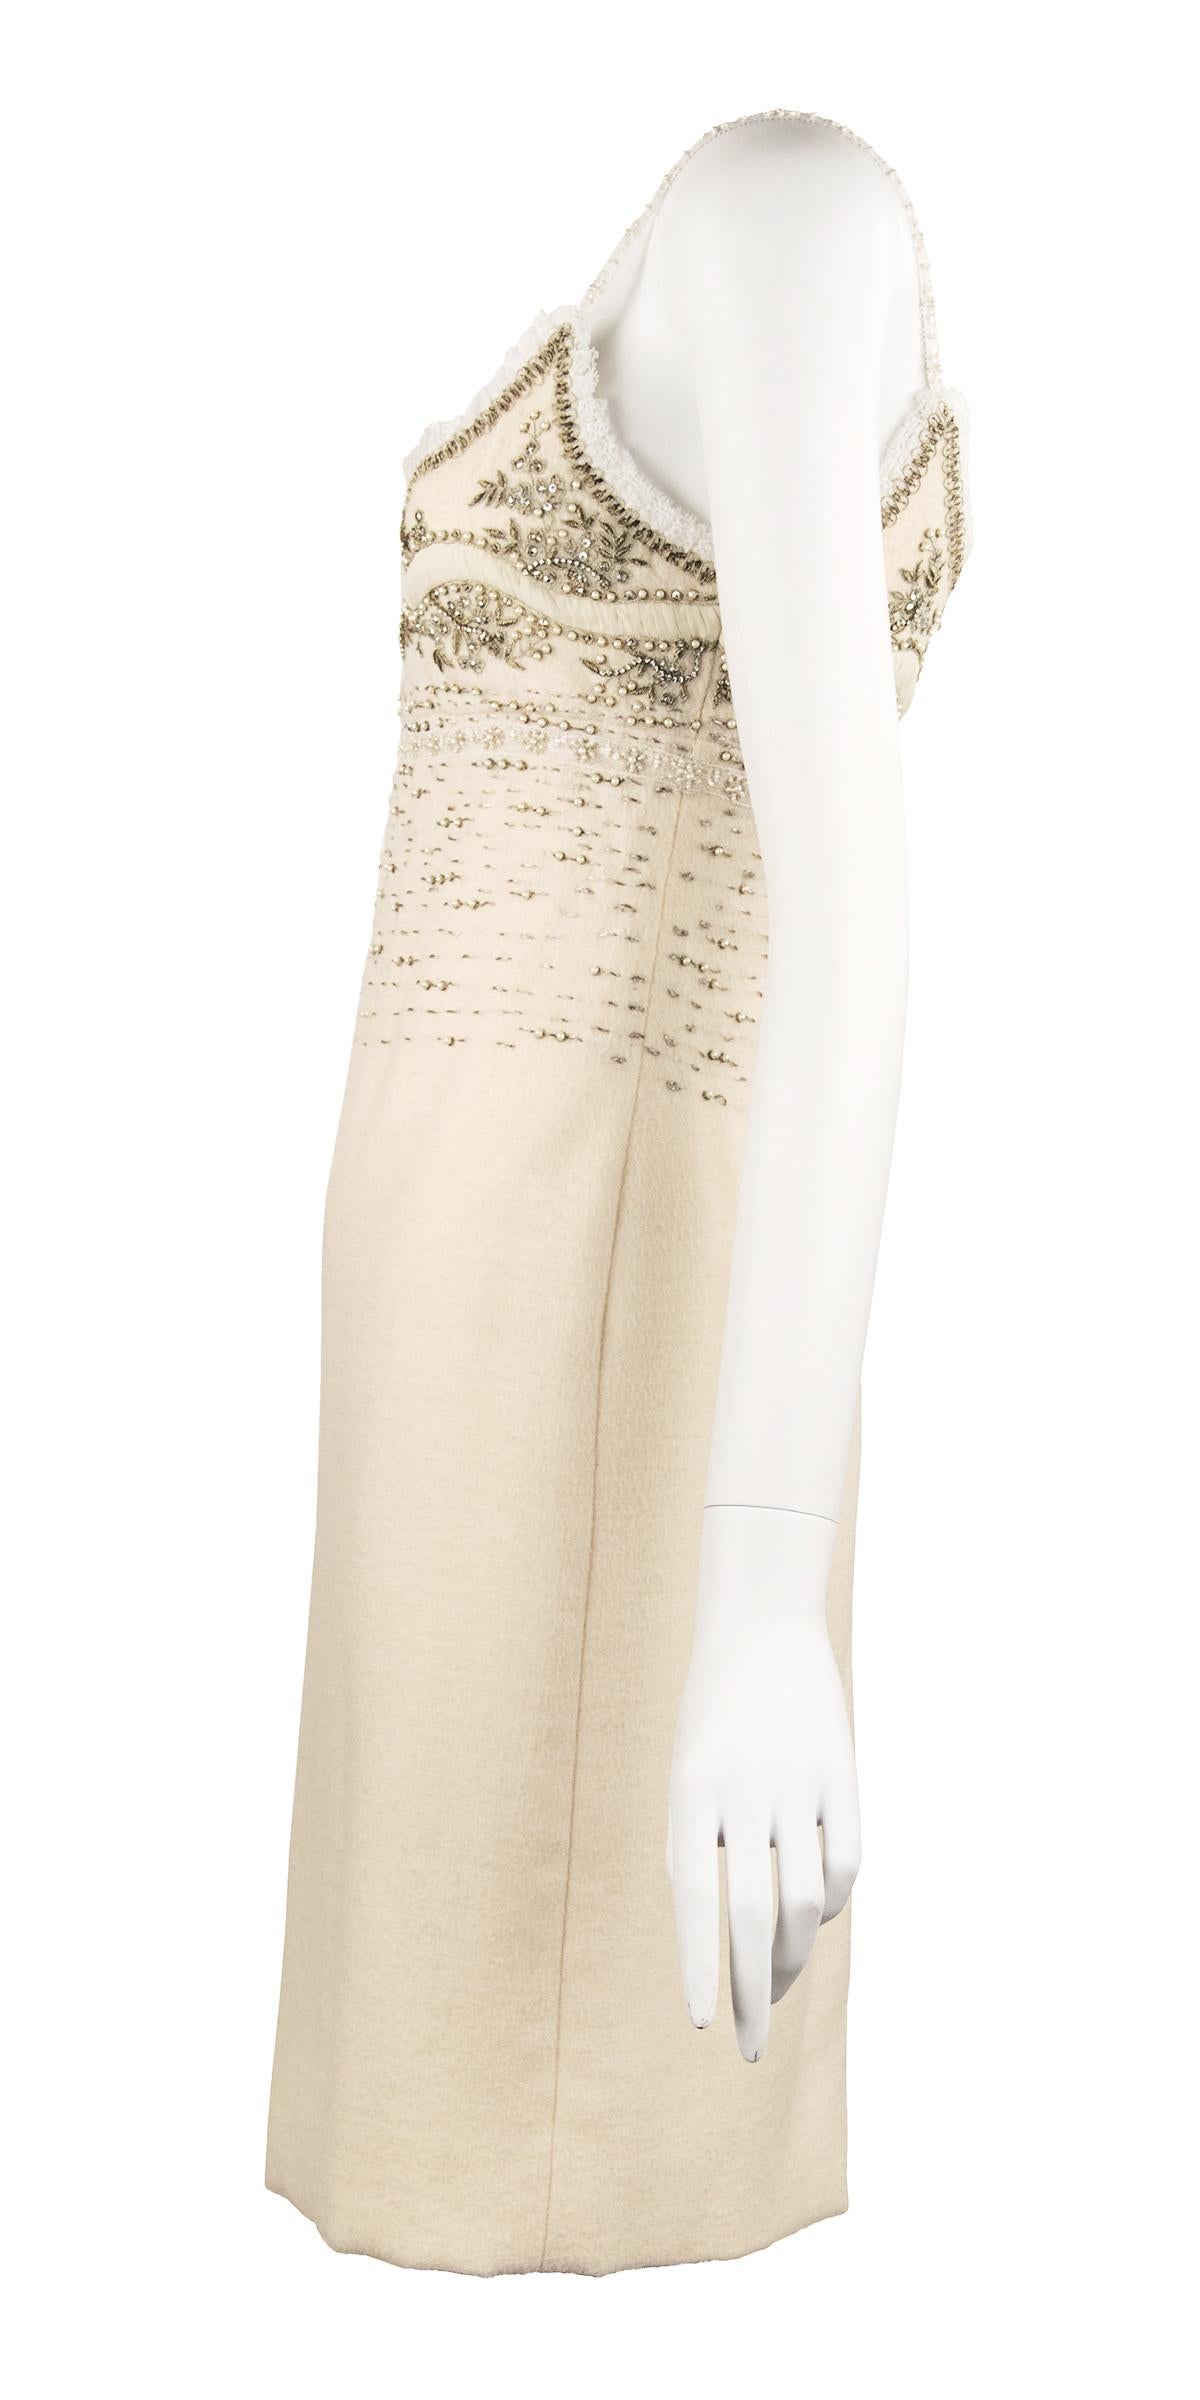 Clean and classic Oscar de la Renta wool ivory sheath dress with spaghetti straps.  Incredible embroidery composed of small faux pearls, beads and metallic thread.  In pristine condition.

Size: 4

Condition: Pristine

Composition: 93% wool 7% nylon